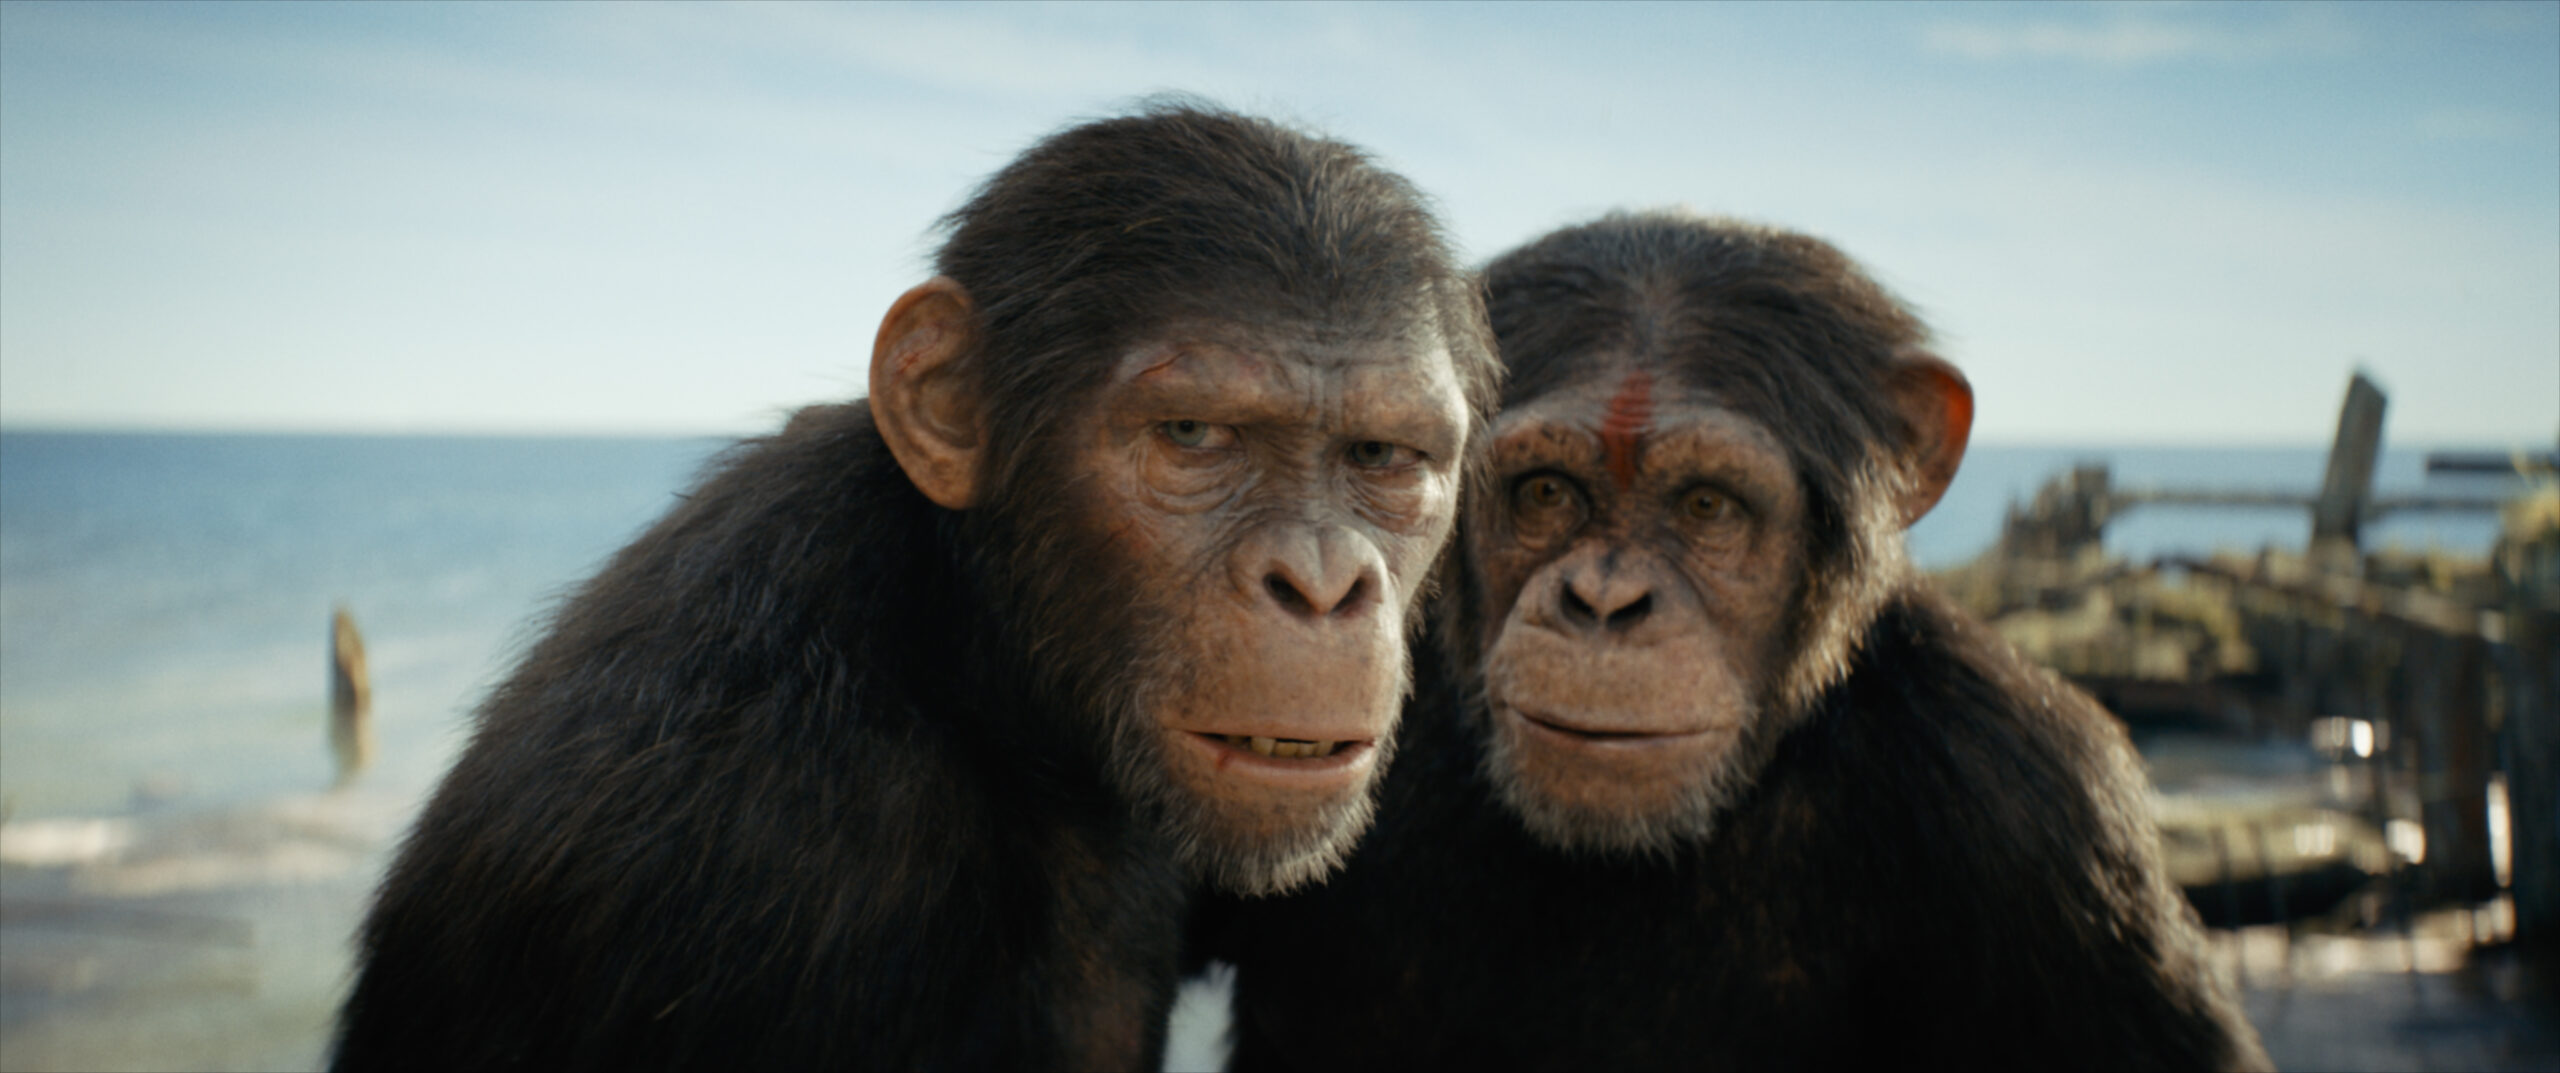 (L-R) Noa (played by Owen Teague) and Dar (played by Sara Wiseman) in 20th Century Studios' KINGDOM OF THE PLANET OF THE APES.